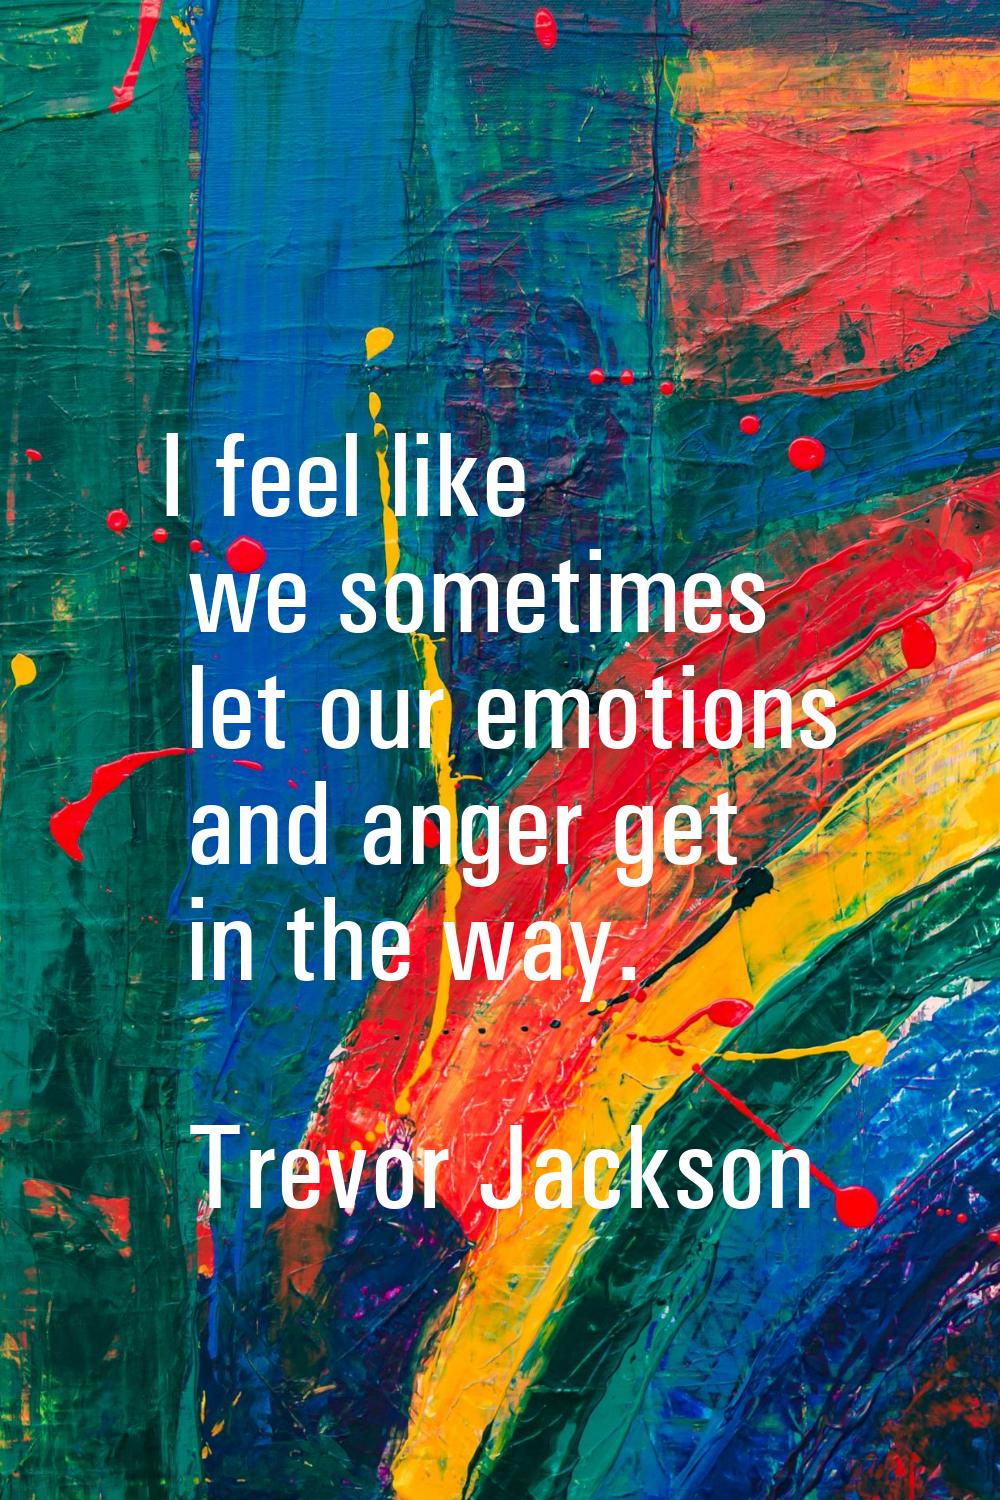 I feel like we sometimes let our emotions and anger get in the way.